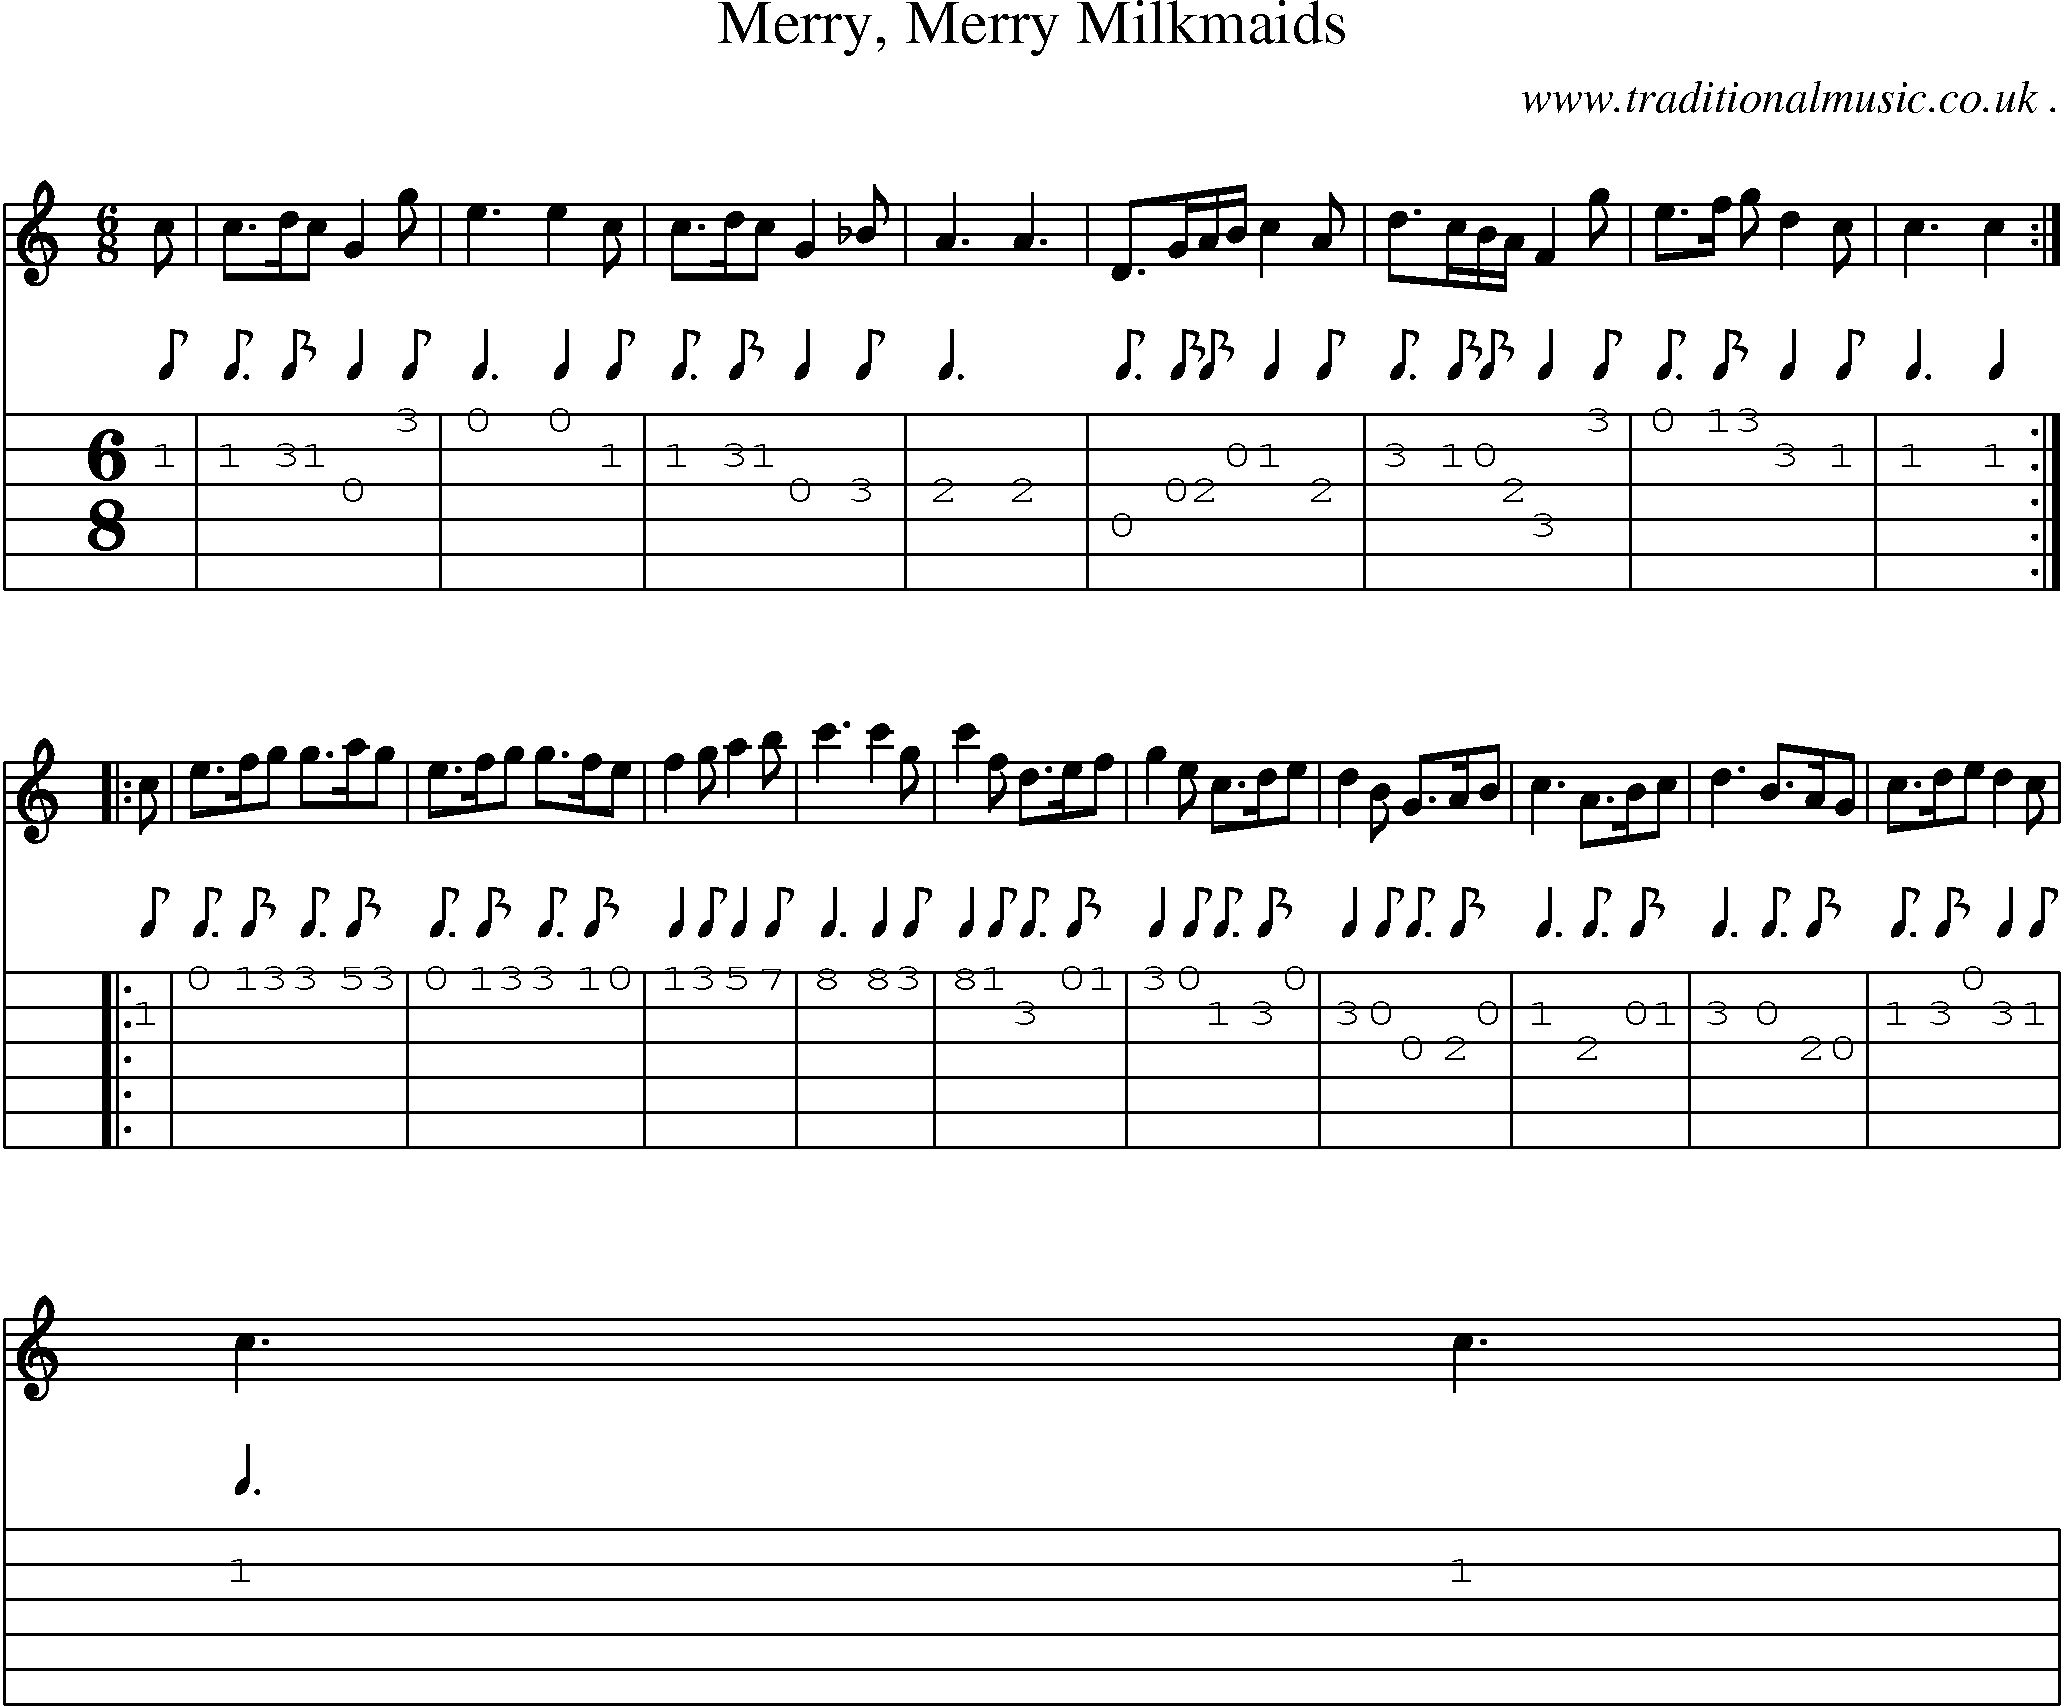 Sheet-Music and Guitar Tabs for Merry Merry Milkmaids